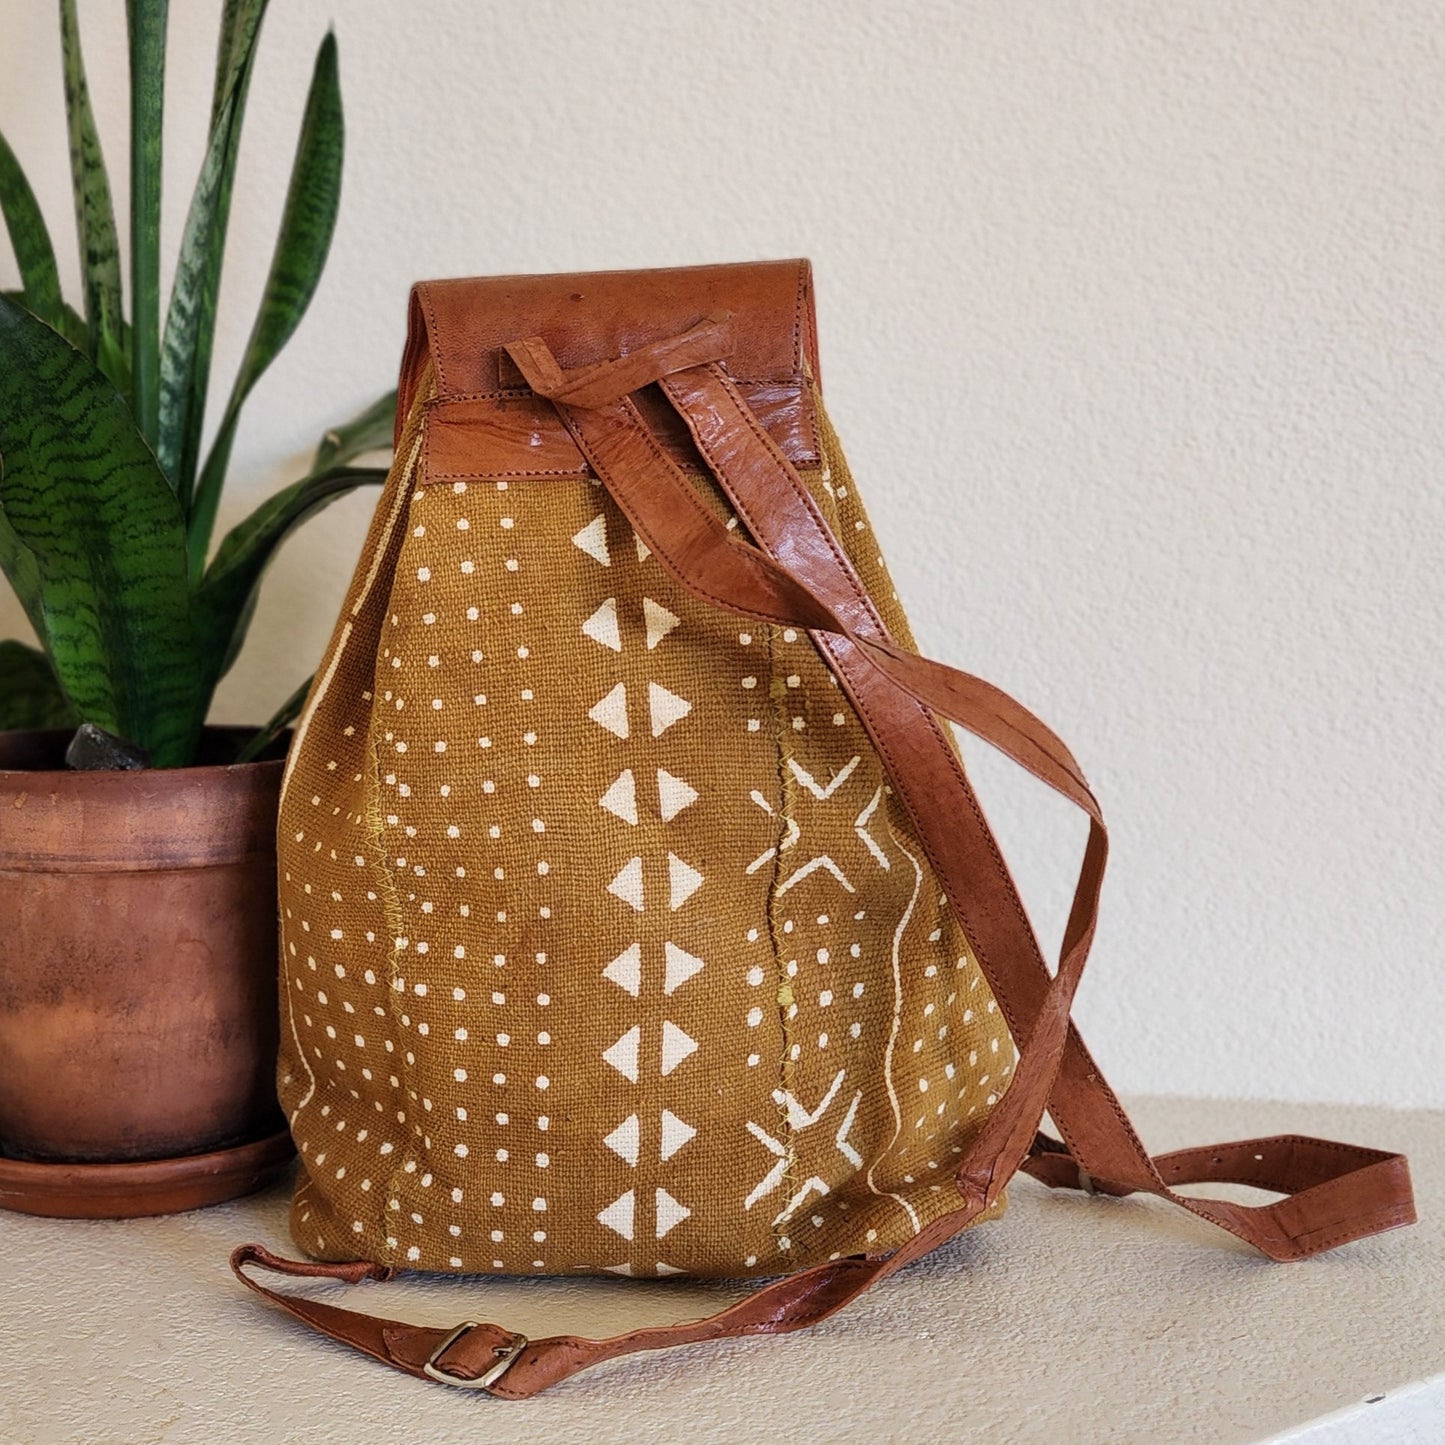 Mustard yellow mudcloth backpack with brown leather